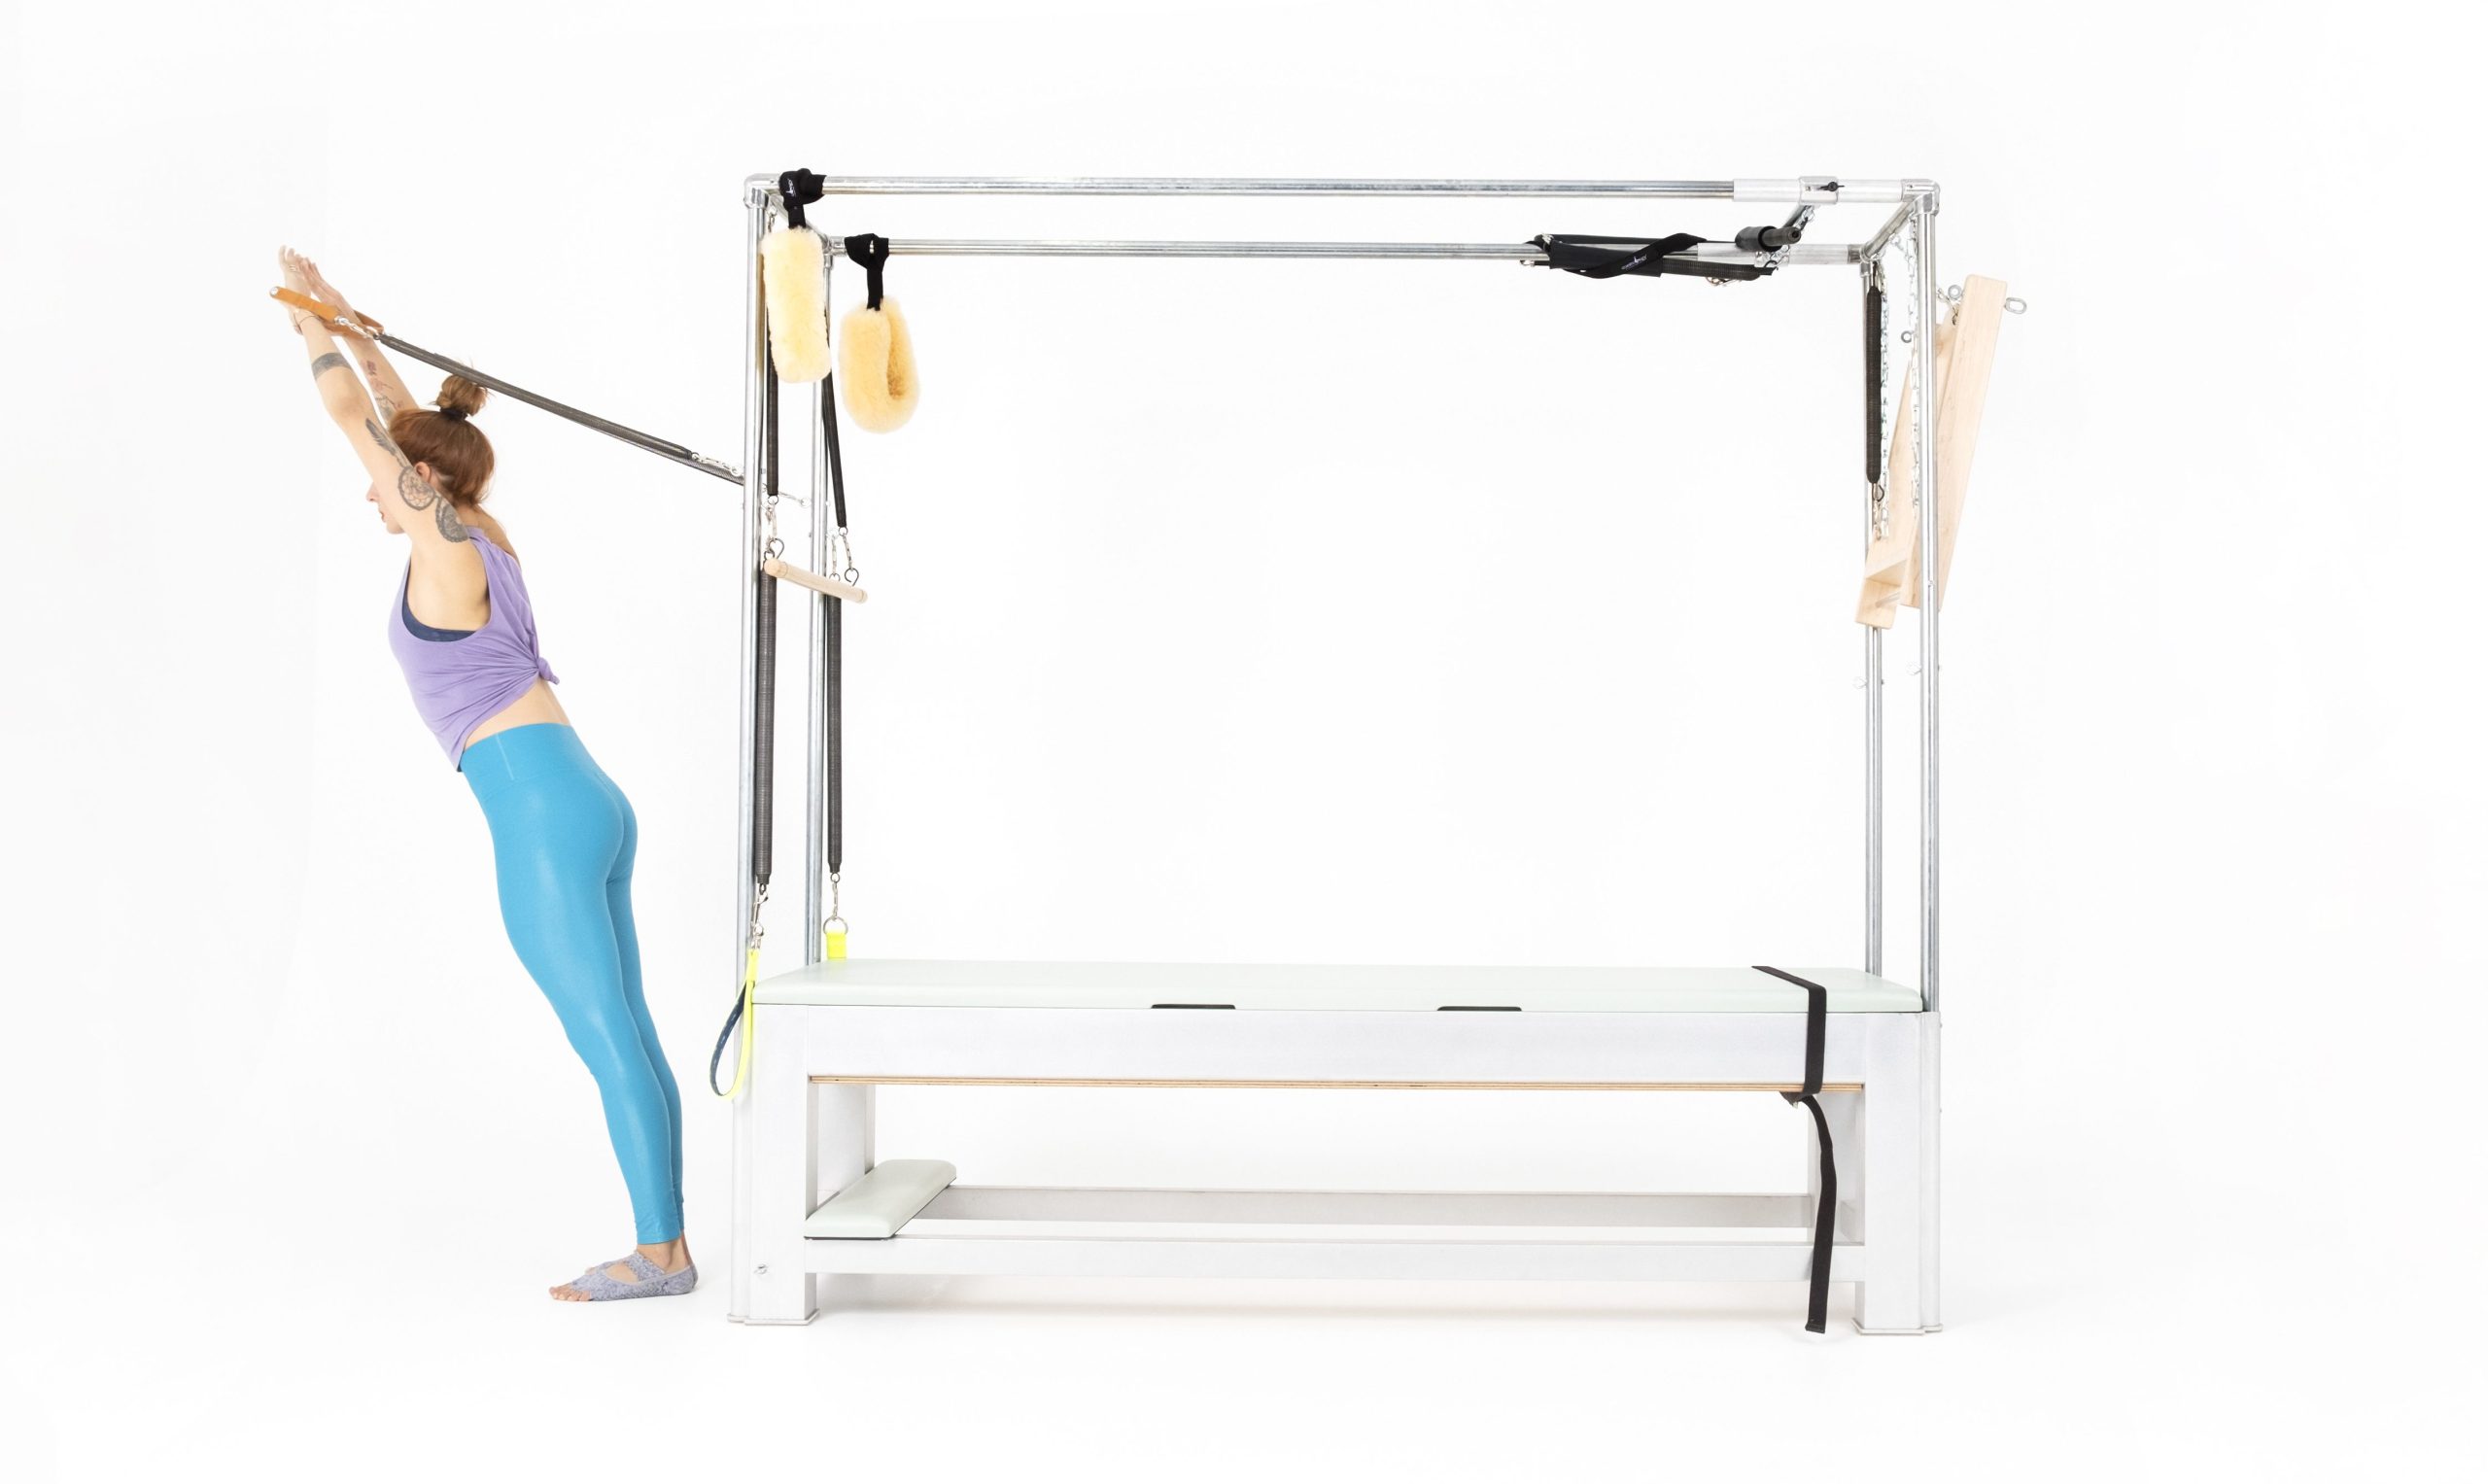 Shave with Standing Arm Springs on the Cadillac or Tower Online Pilates Classes